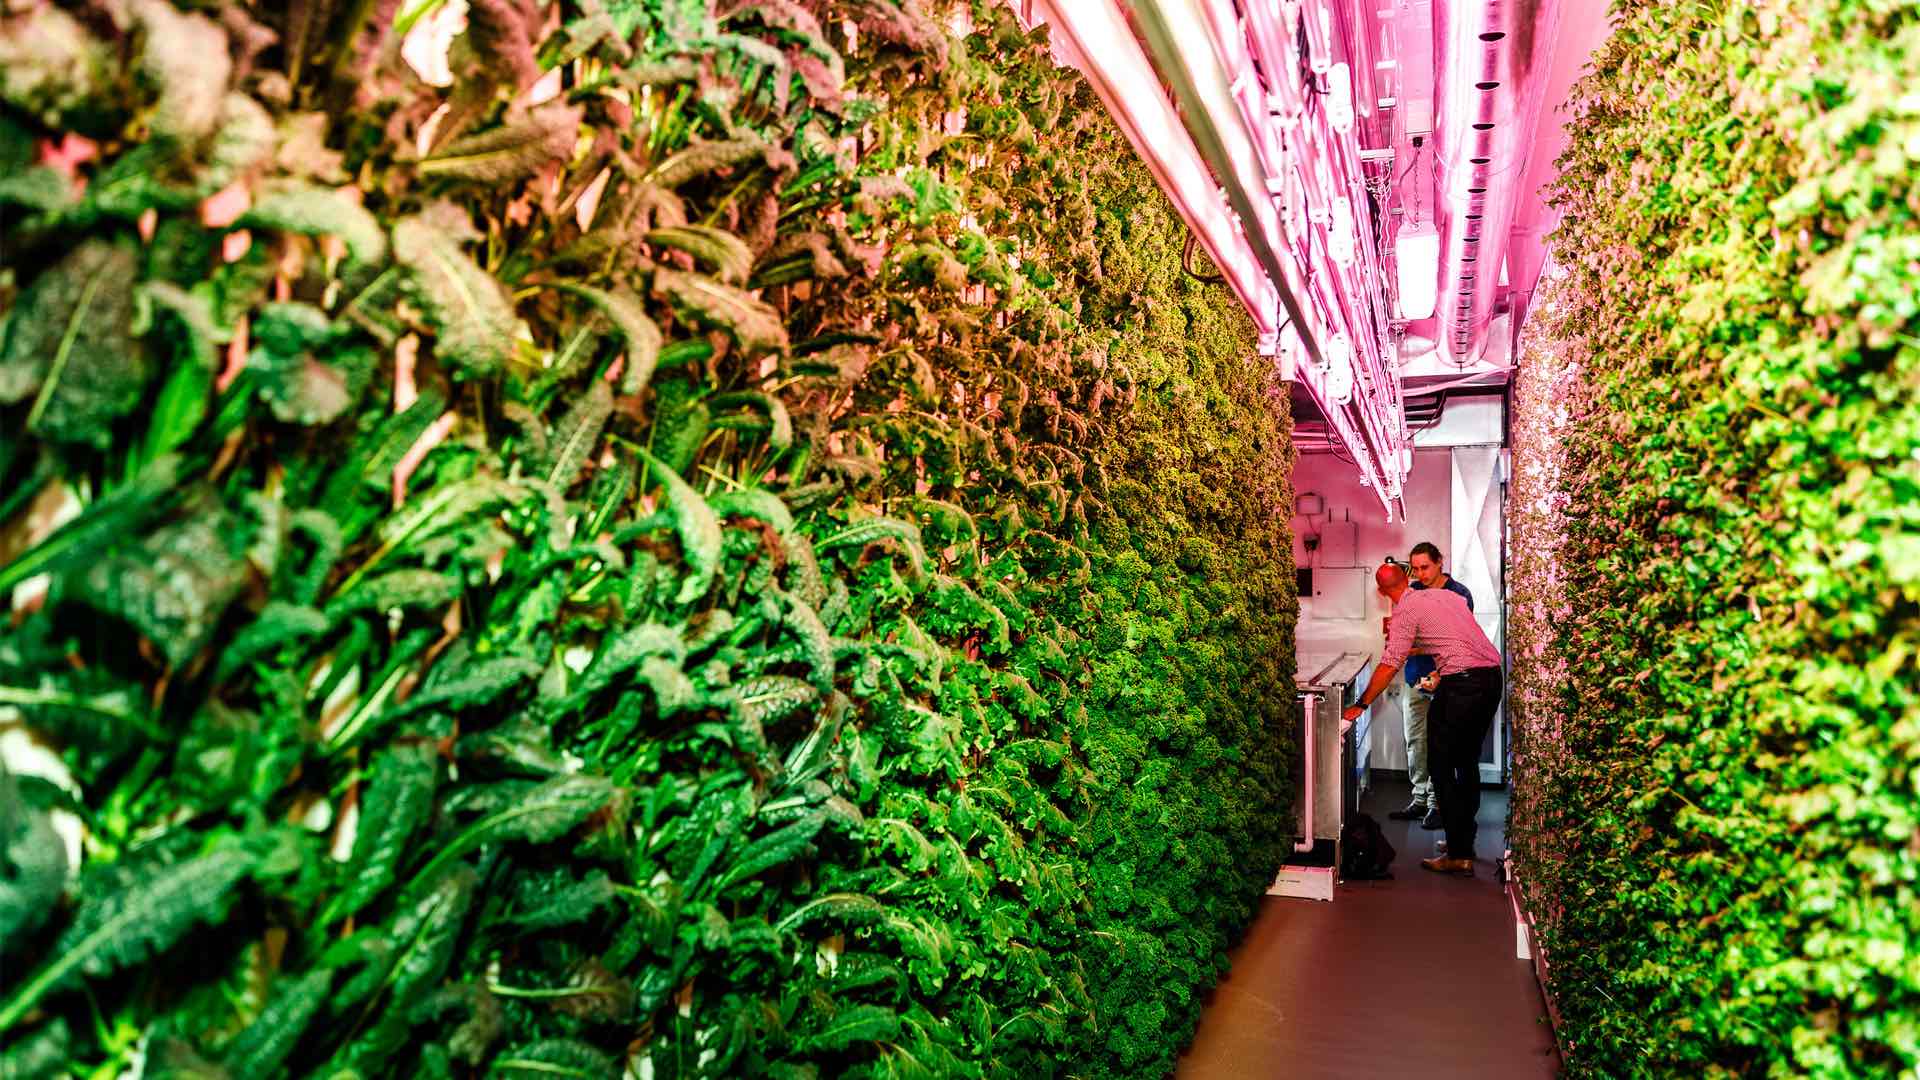 Brisbane's Eat Street Is Now Home to an Aussie-First Vertical Hydroponic Farm